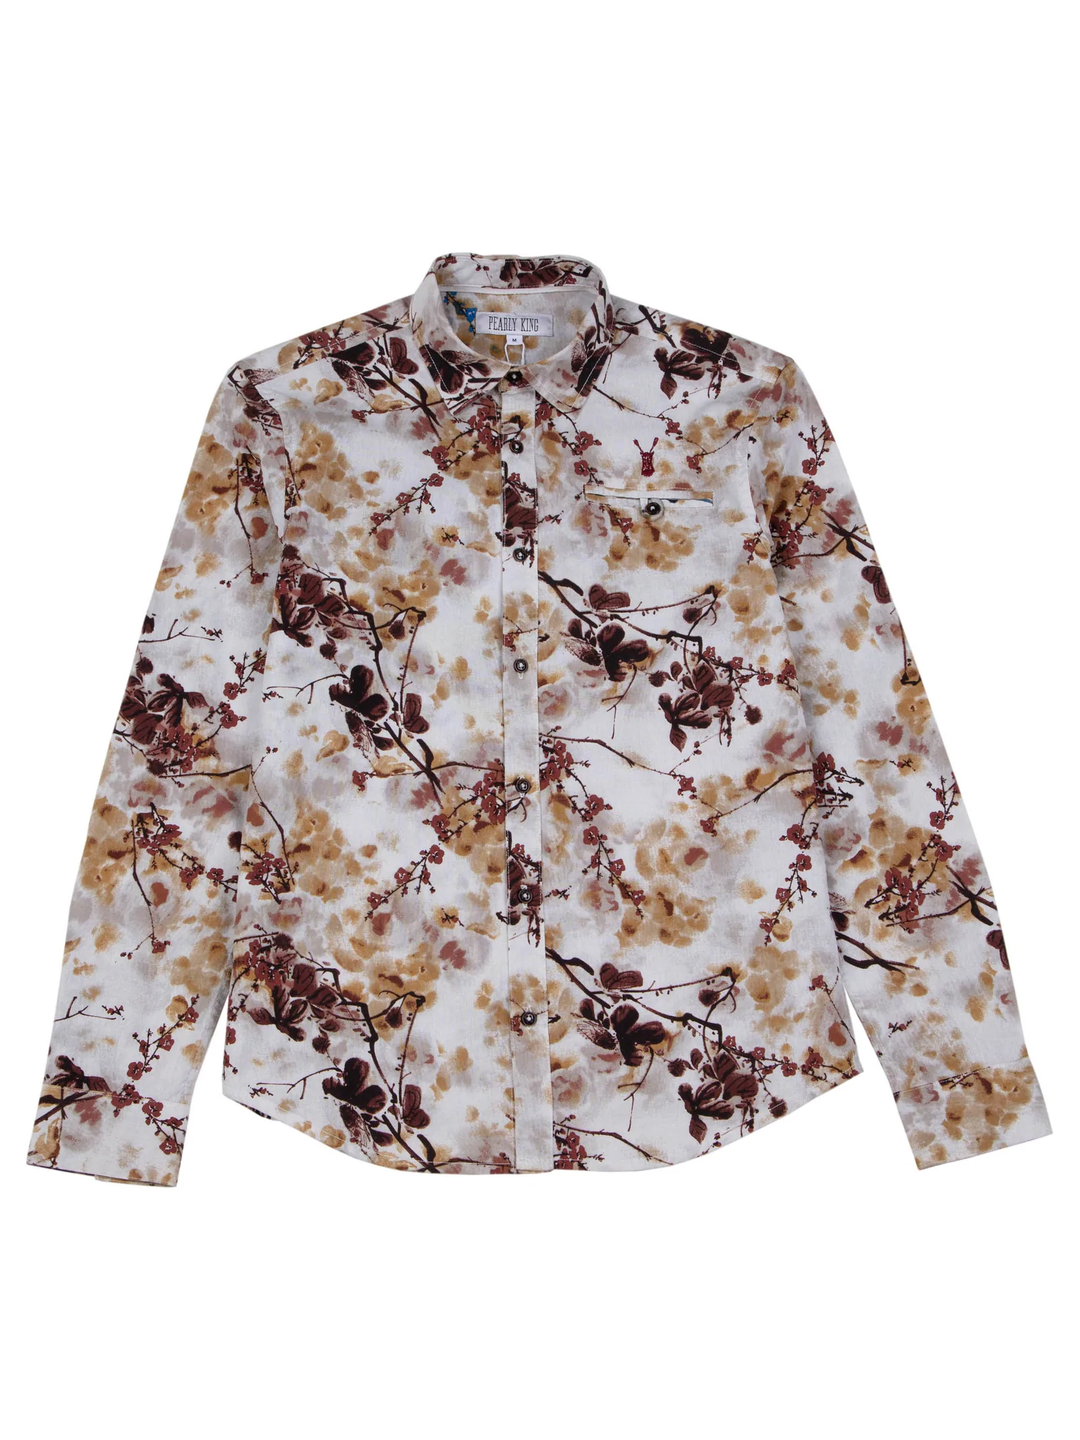 Pearly King - Bloom Long Sleeve Shirt in Clay | Buster McGee